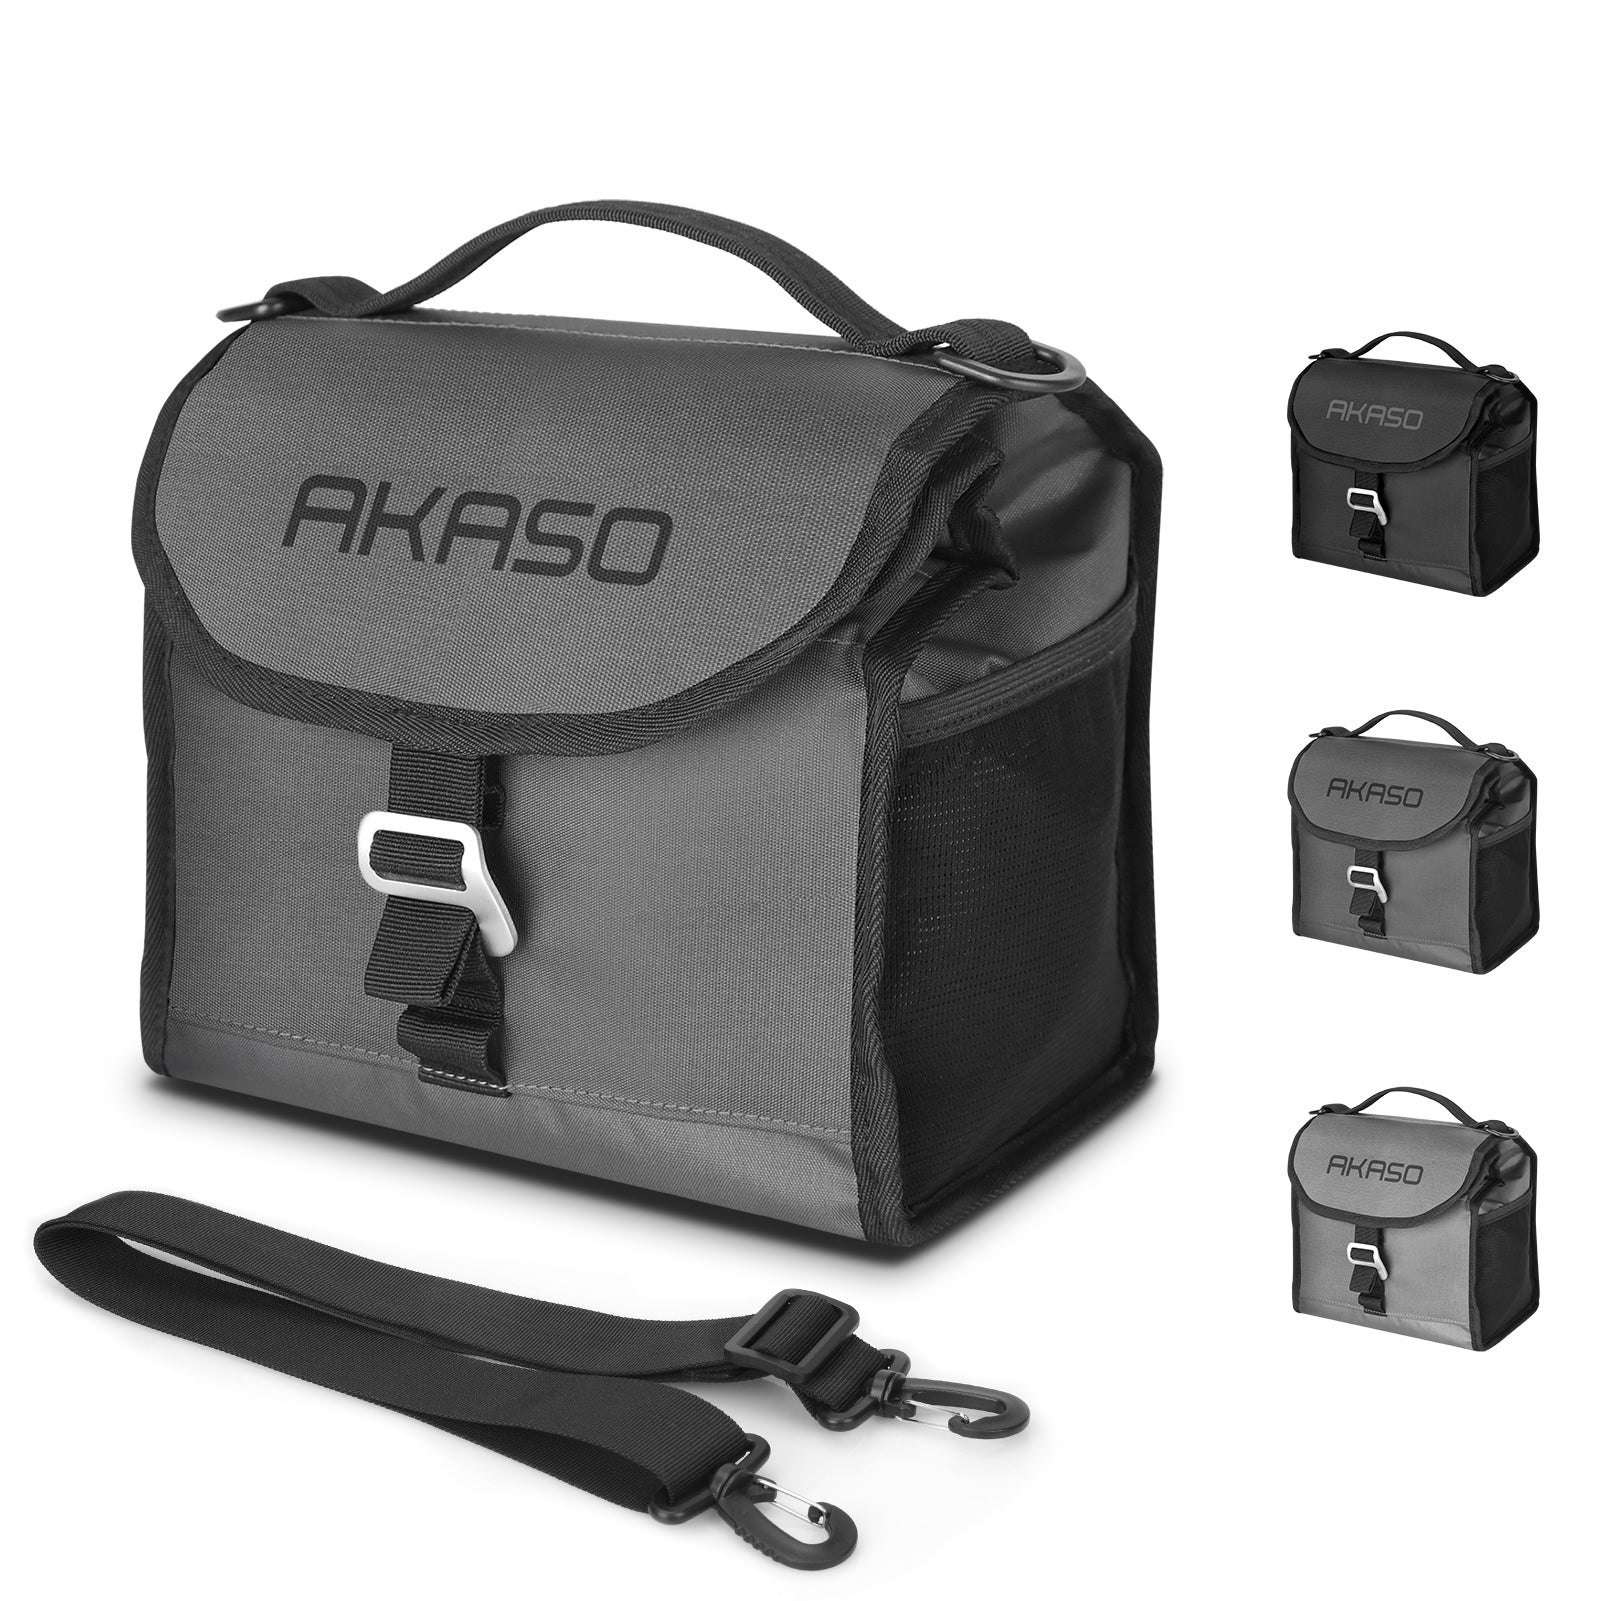 6L Small Cooler Bag for 12 Cans - akasooutdoors